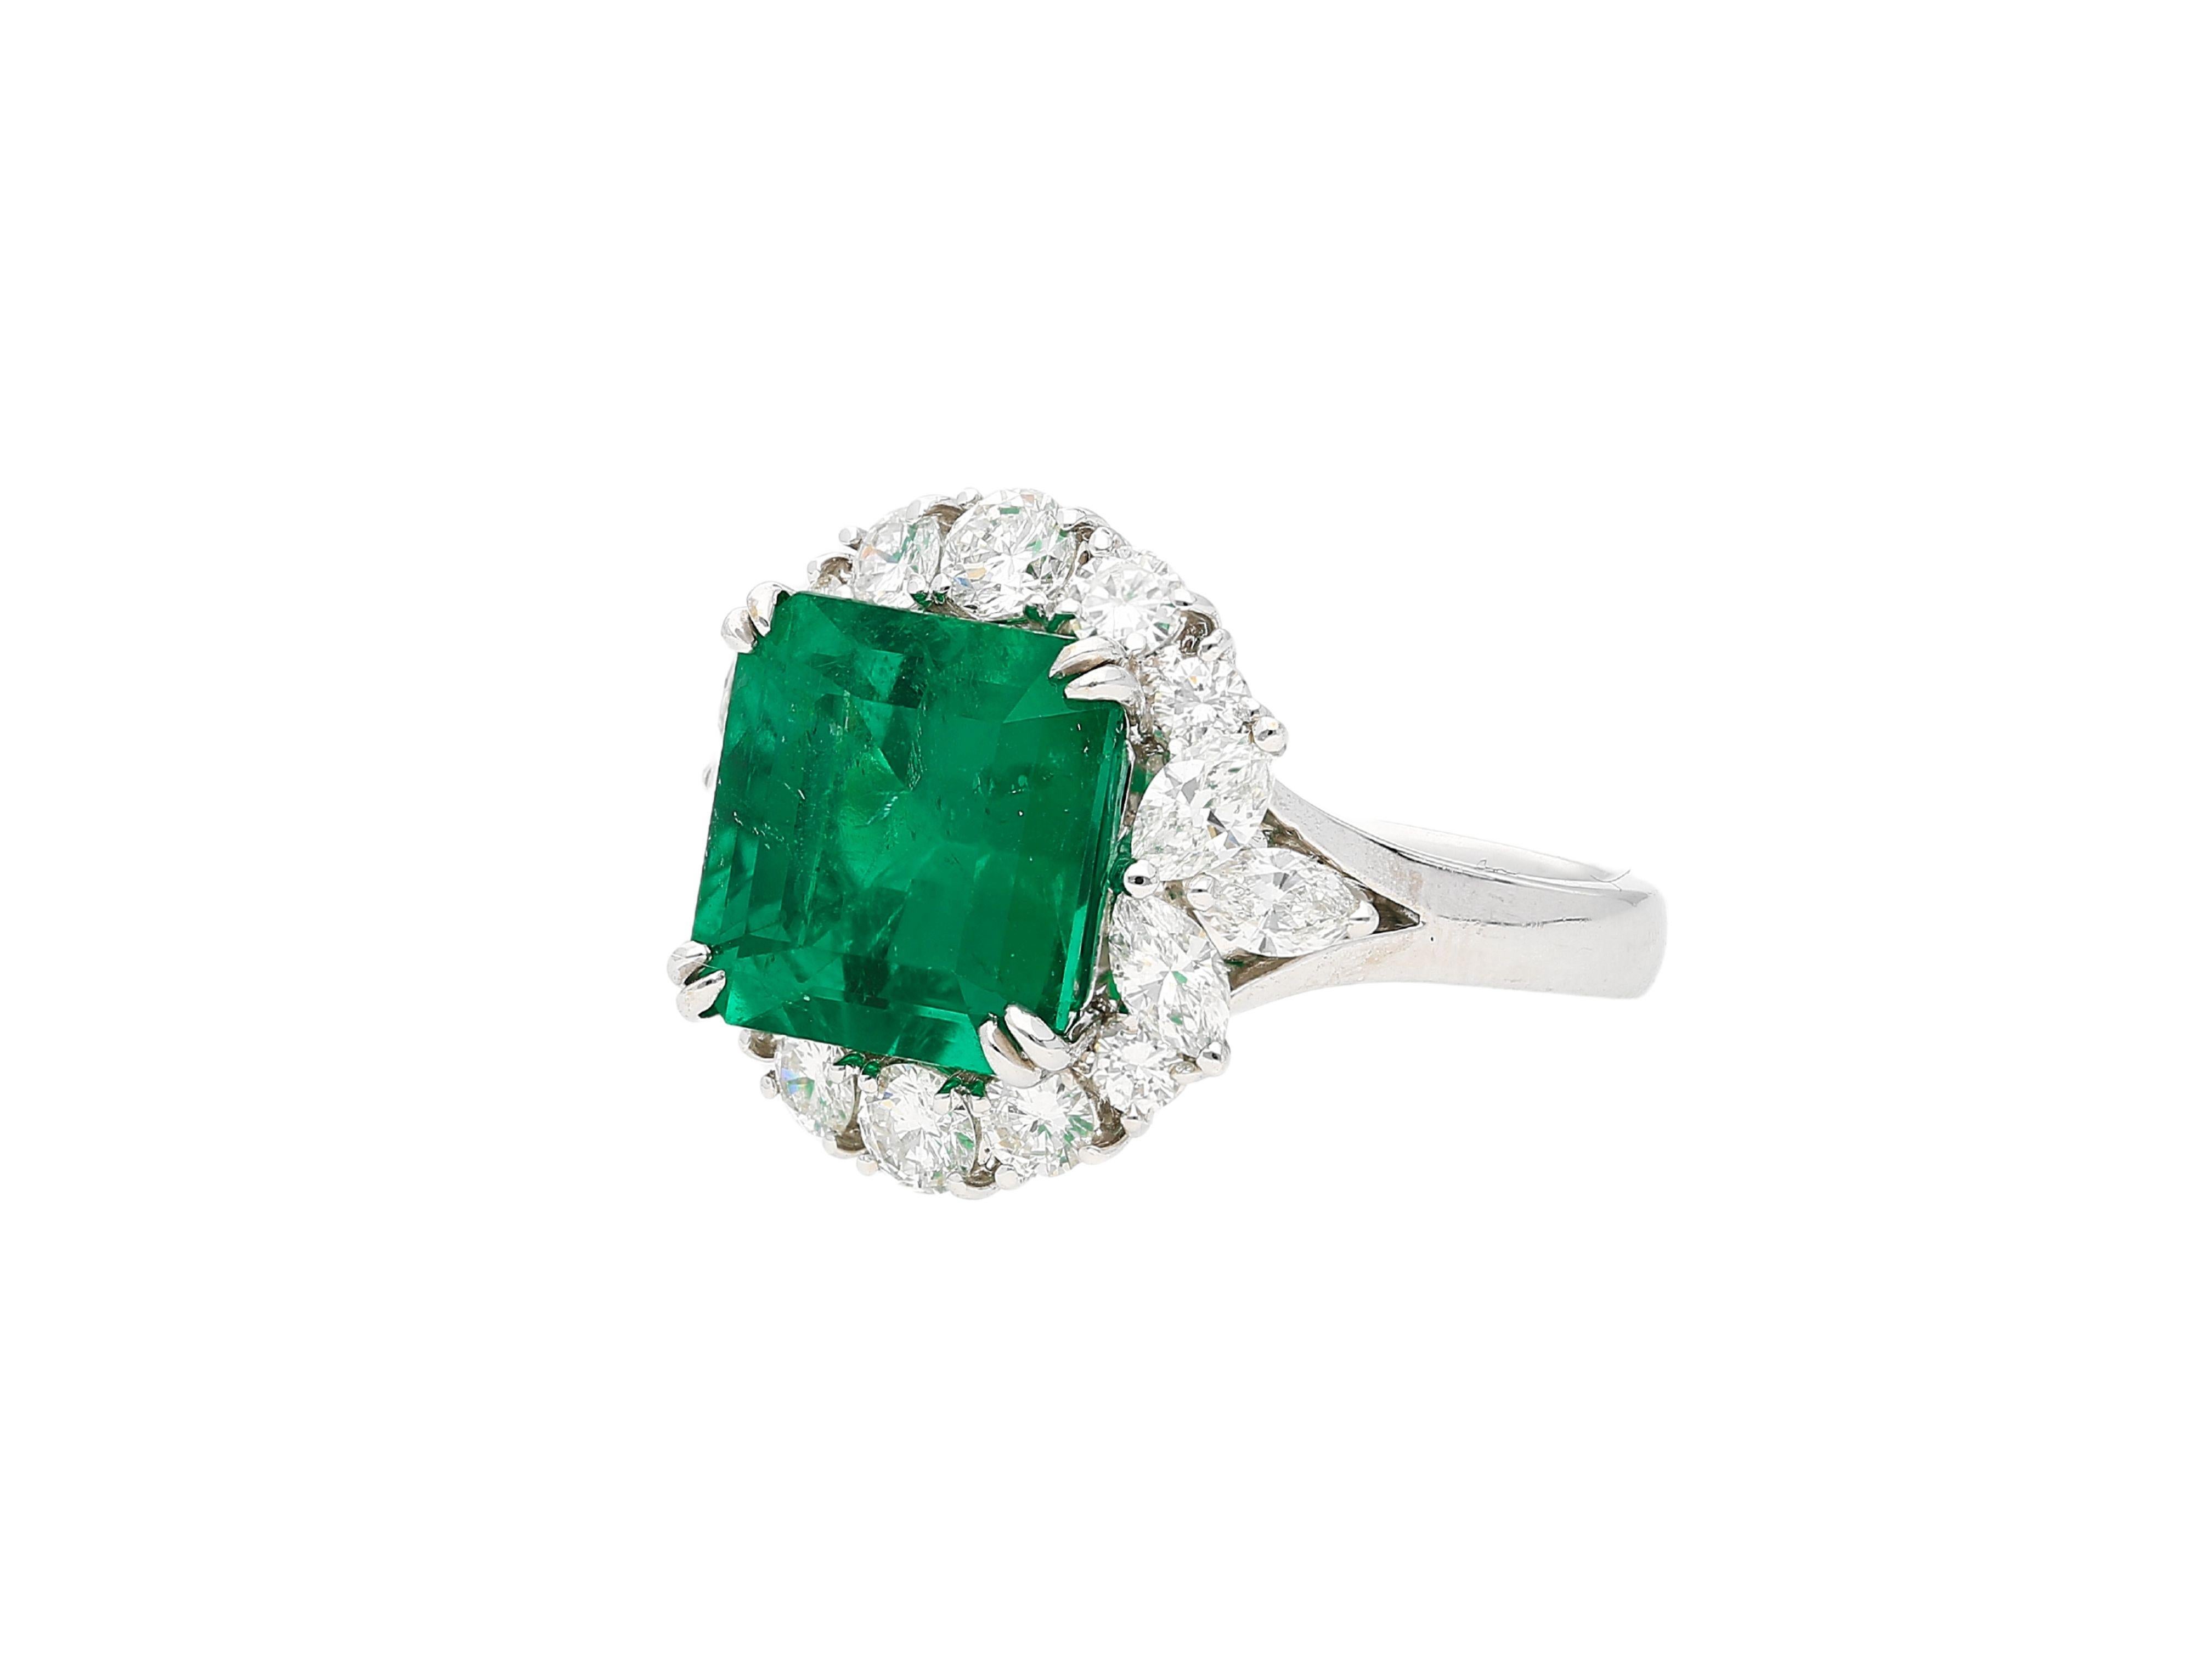 Magnificent 5.20 carat Emerald of Colombian origin. This Emerald bears excellent color, transparency, and luster. All while having minor oil treatment. An extremely rare gem considering its over 5-carat weight. The legendary Emerald center stone is